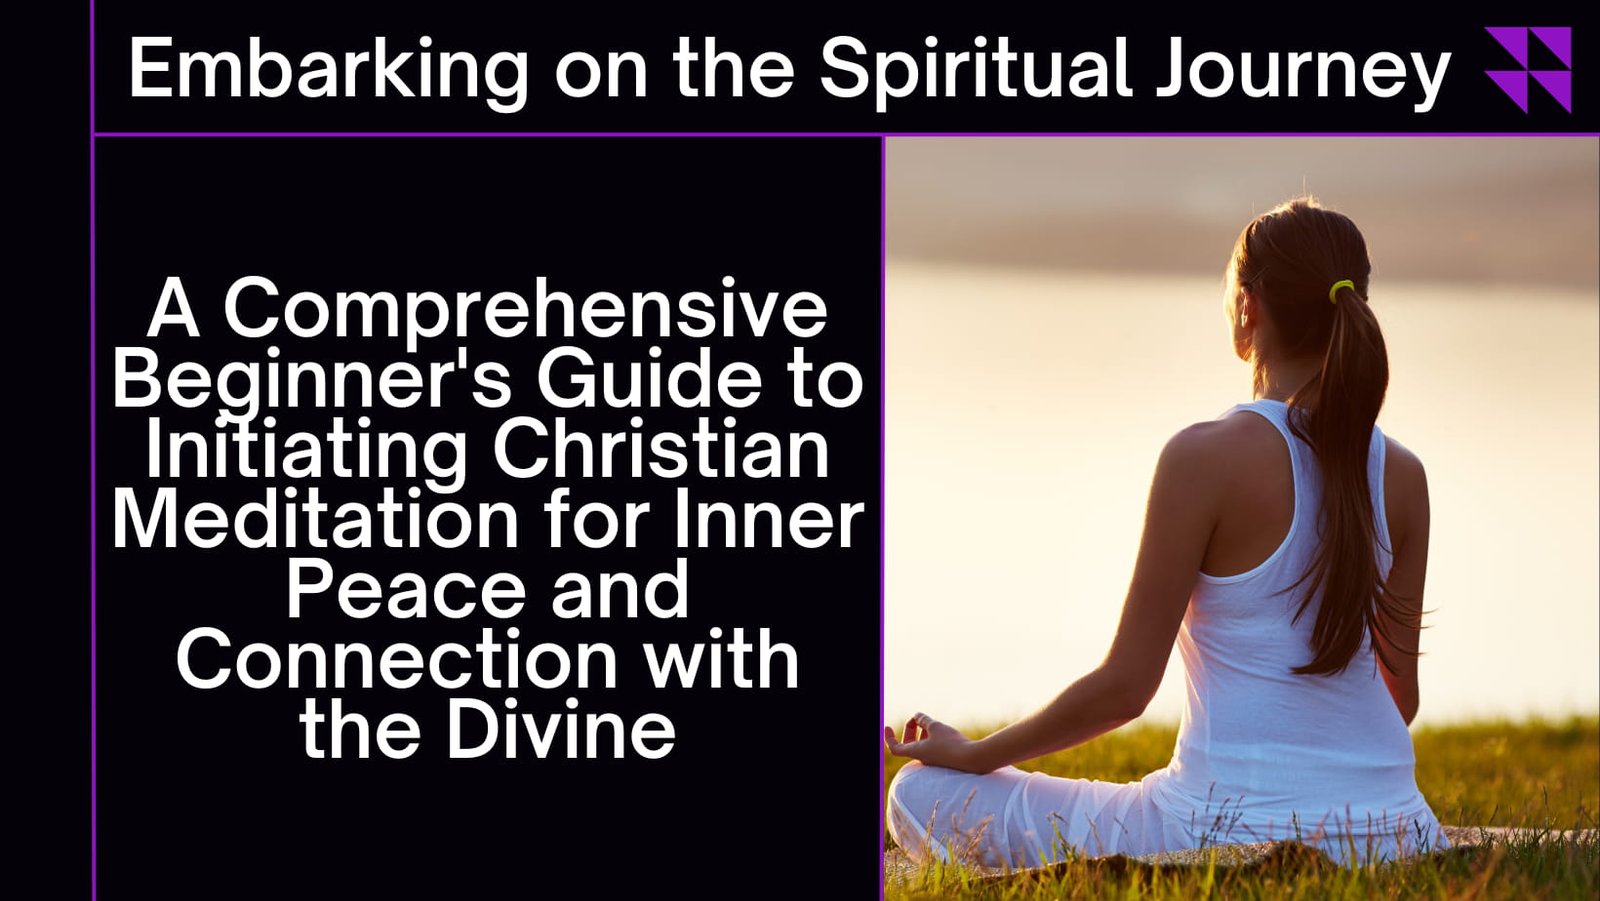 Embarking on the Spiritual JourneyA Comprehensive Beginner's Guide to Initiating Christian Meditation for Inner Peace and Connection with the Divine